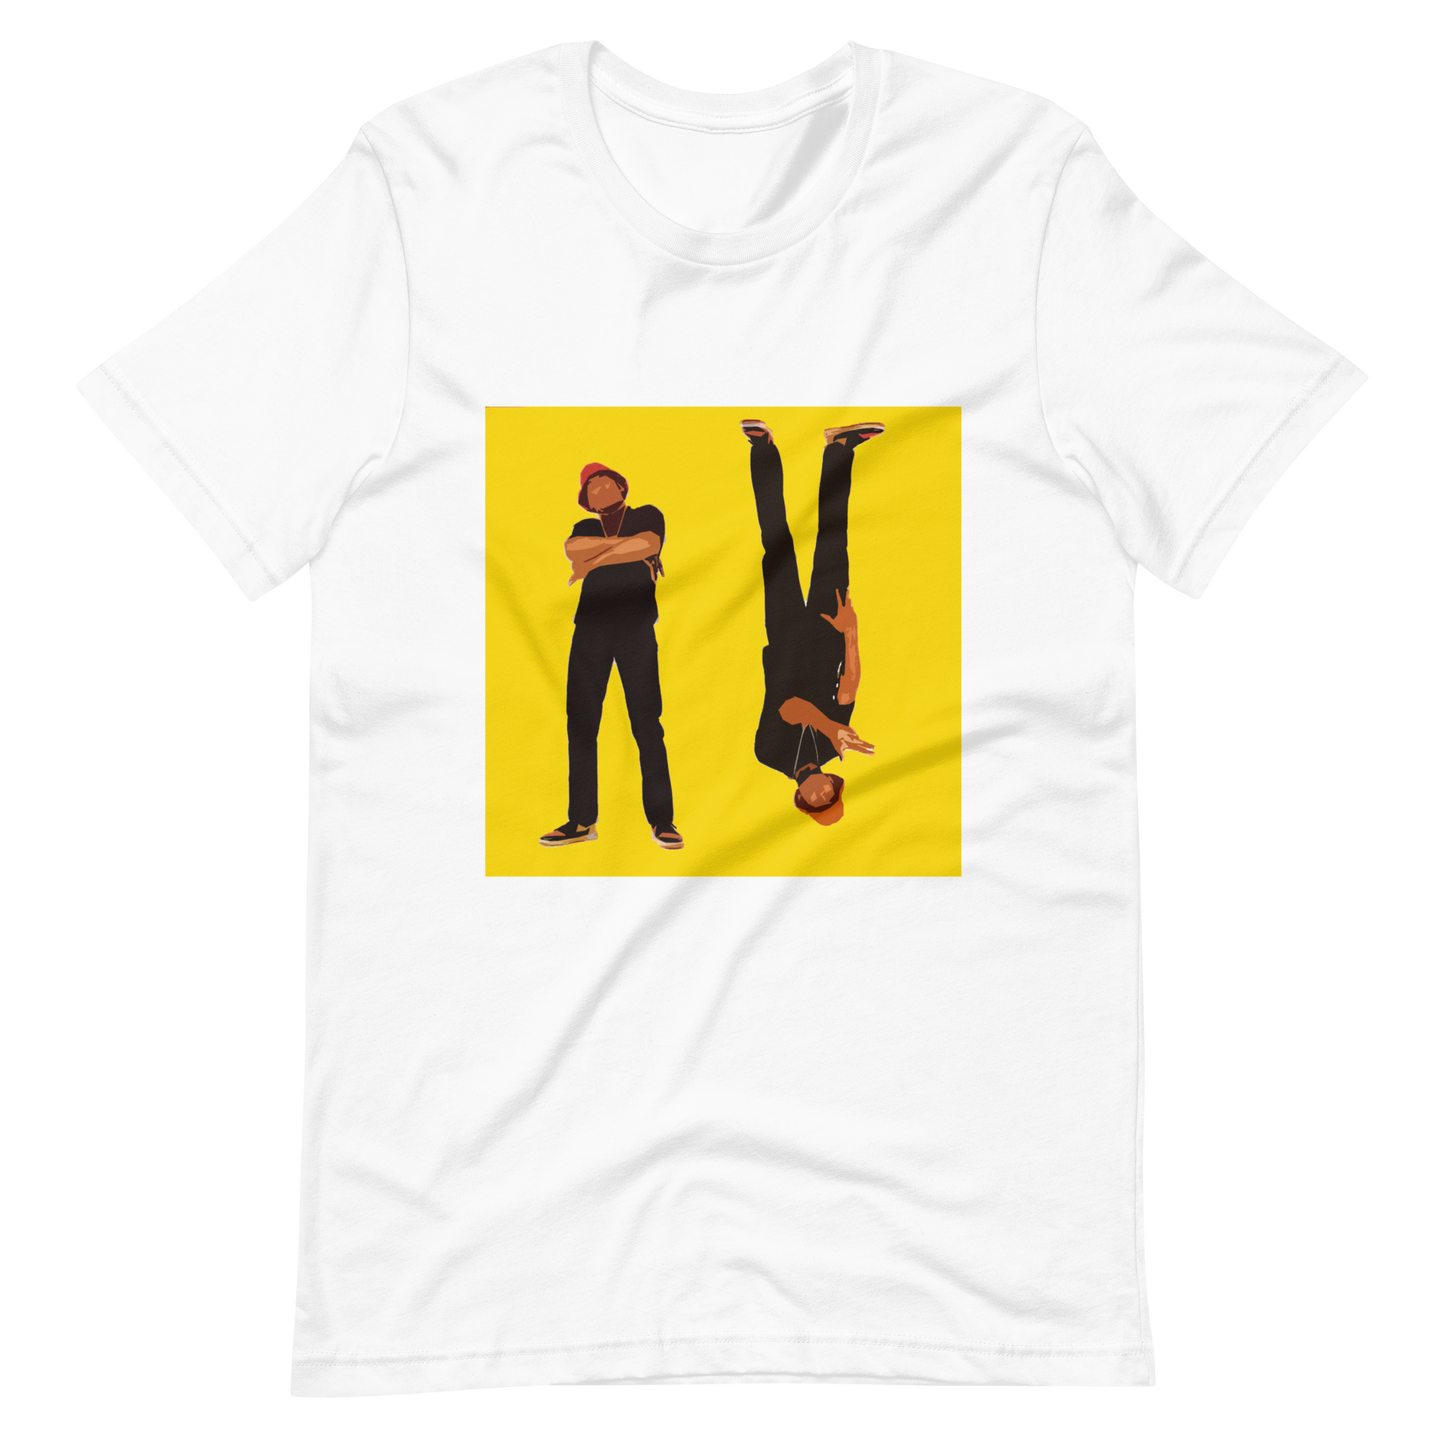 The GOAT Tee (LL Cool J) - Color